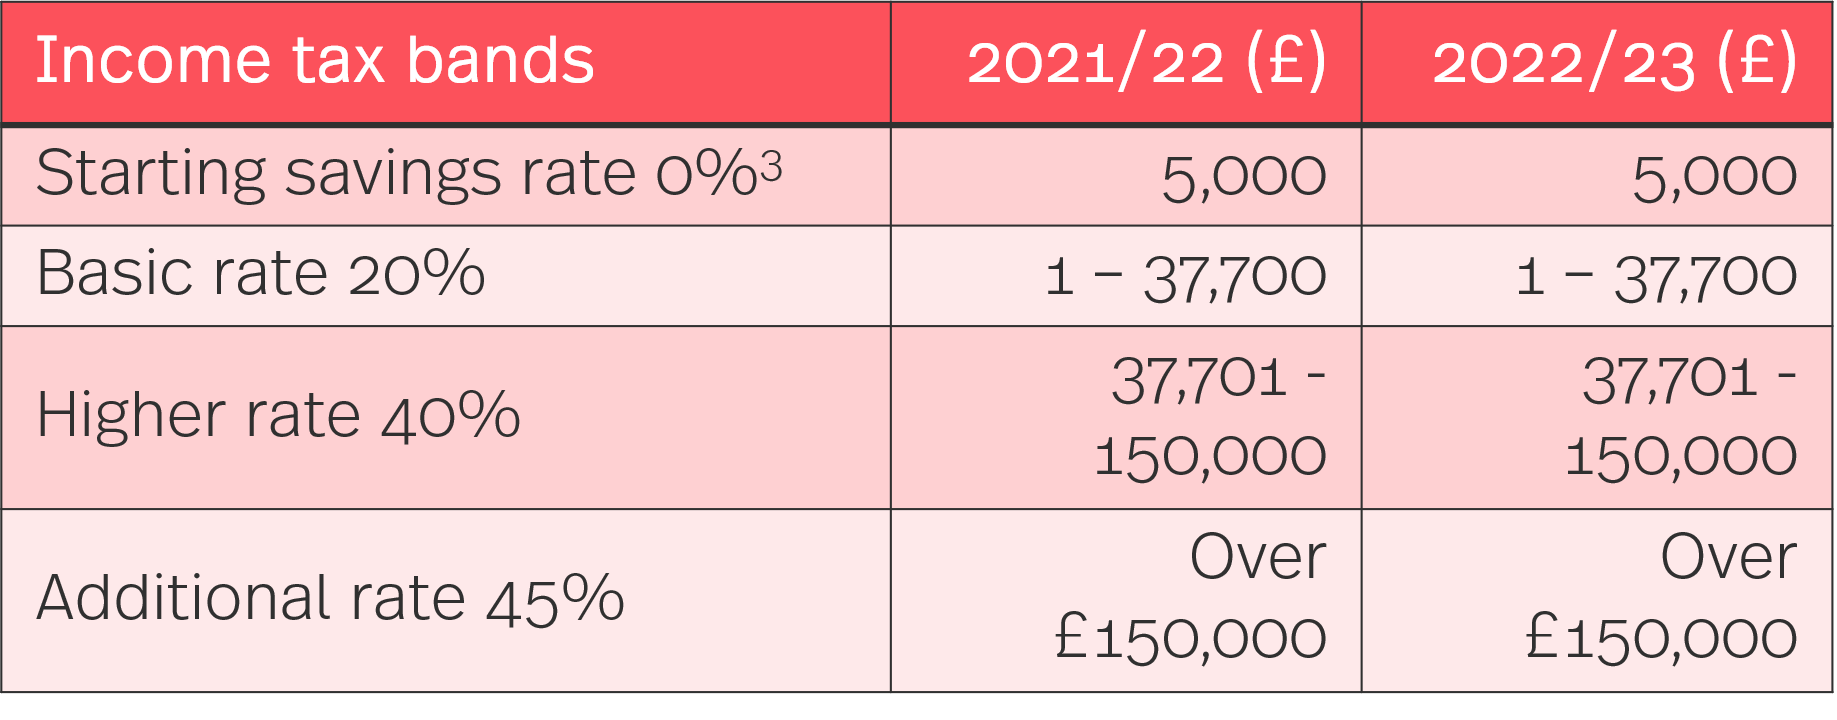 hmrc-tax-rates-and-allowances-for-2022-23-simmons-simmons